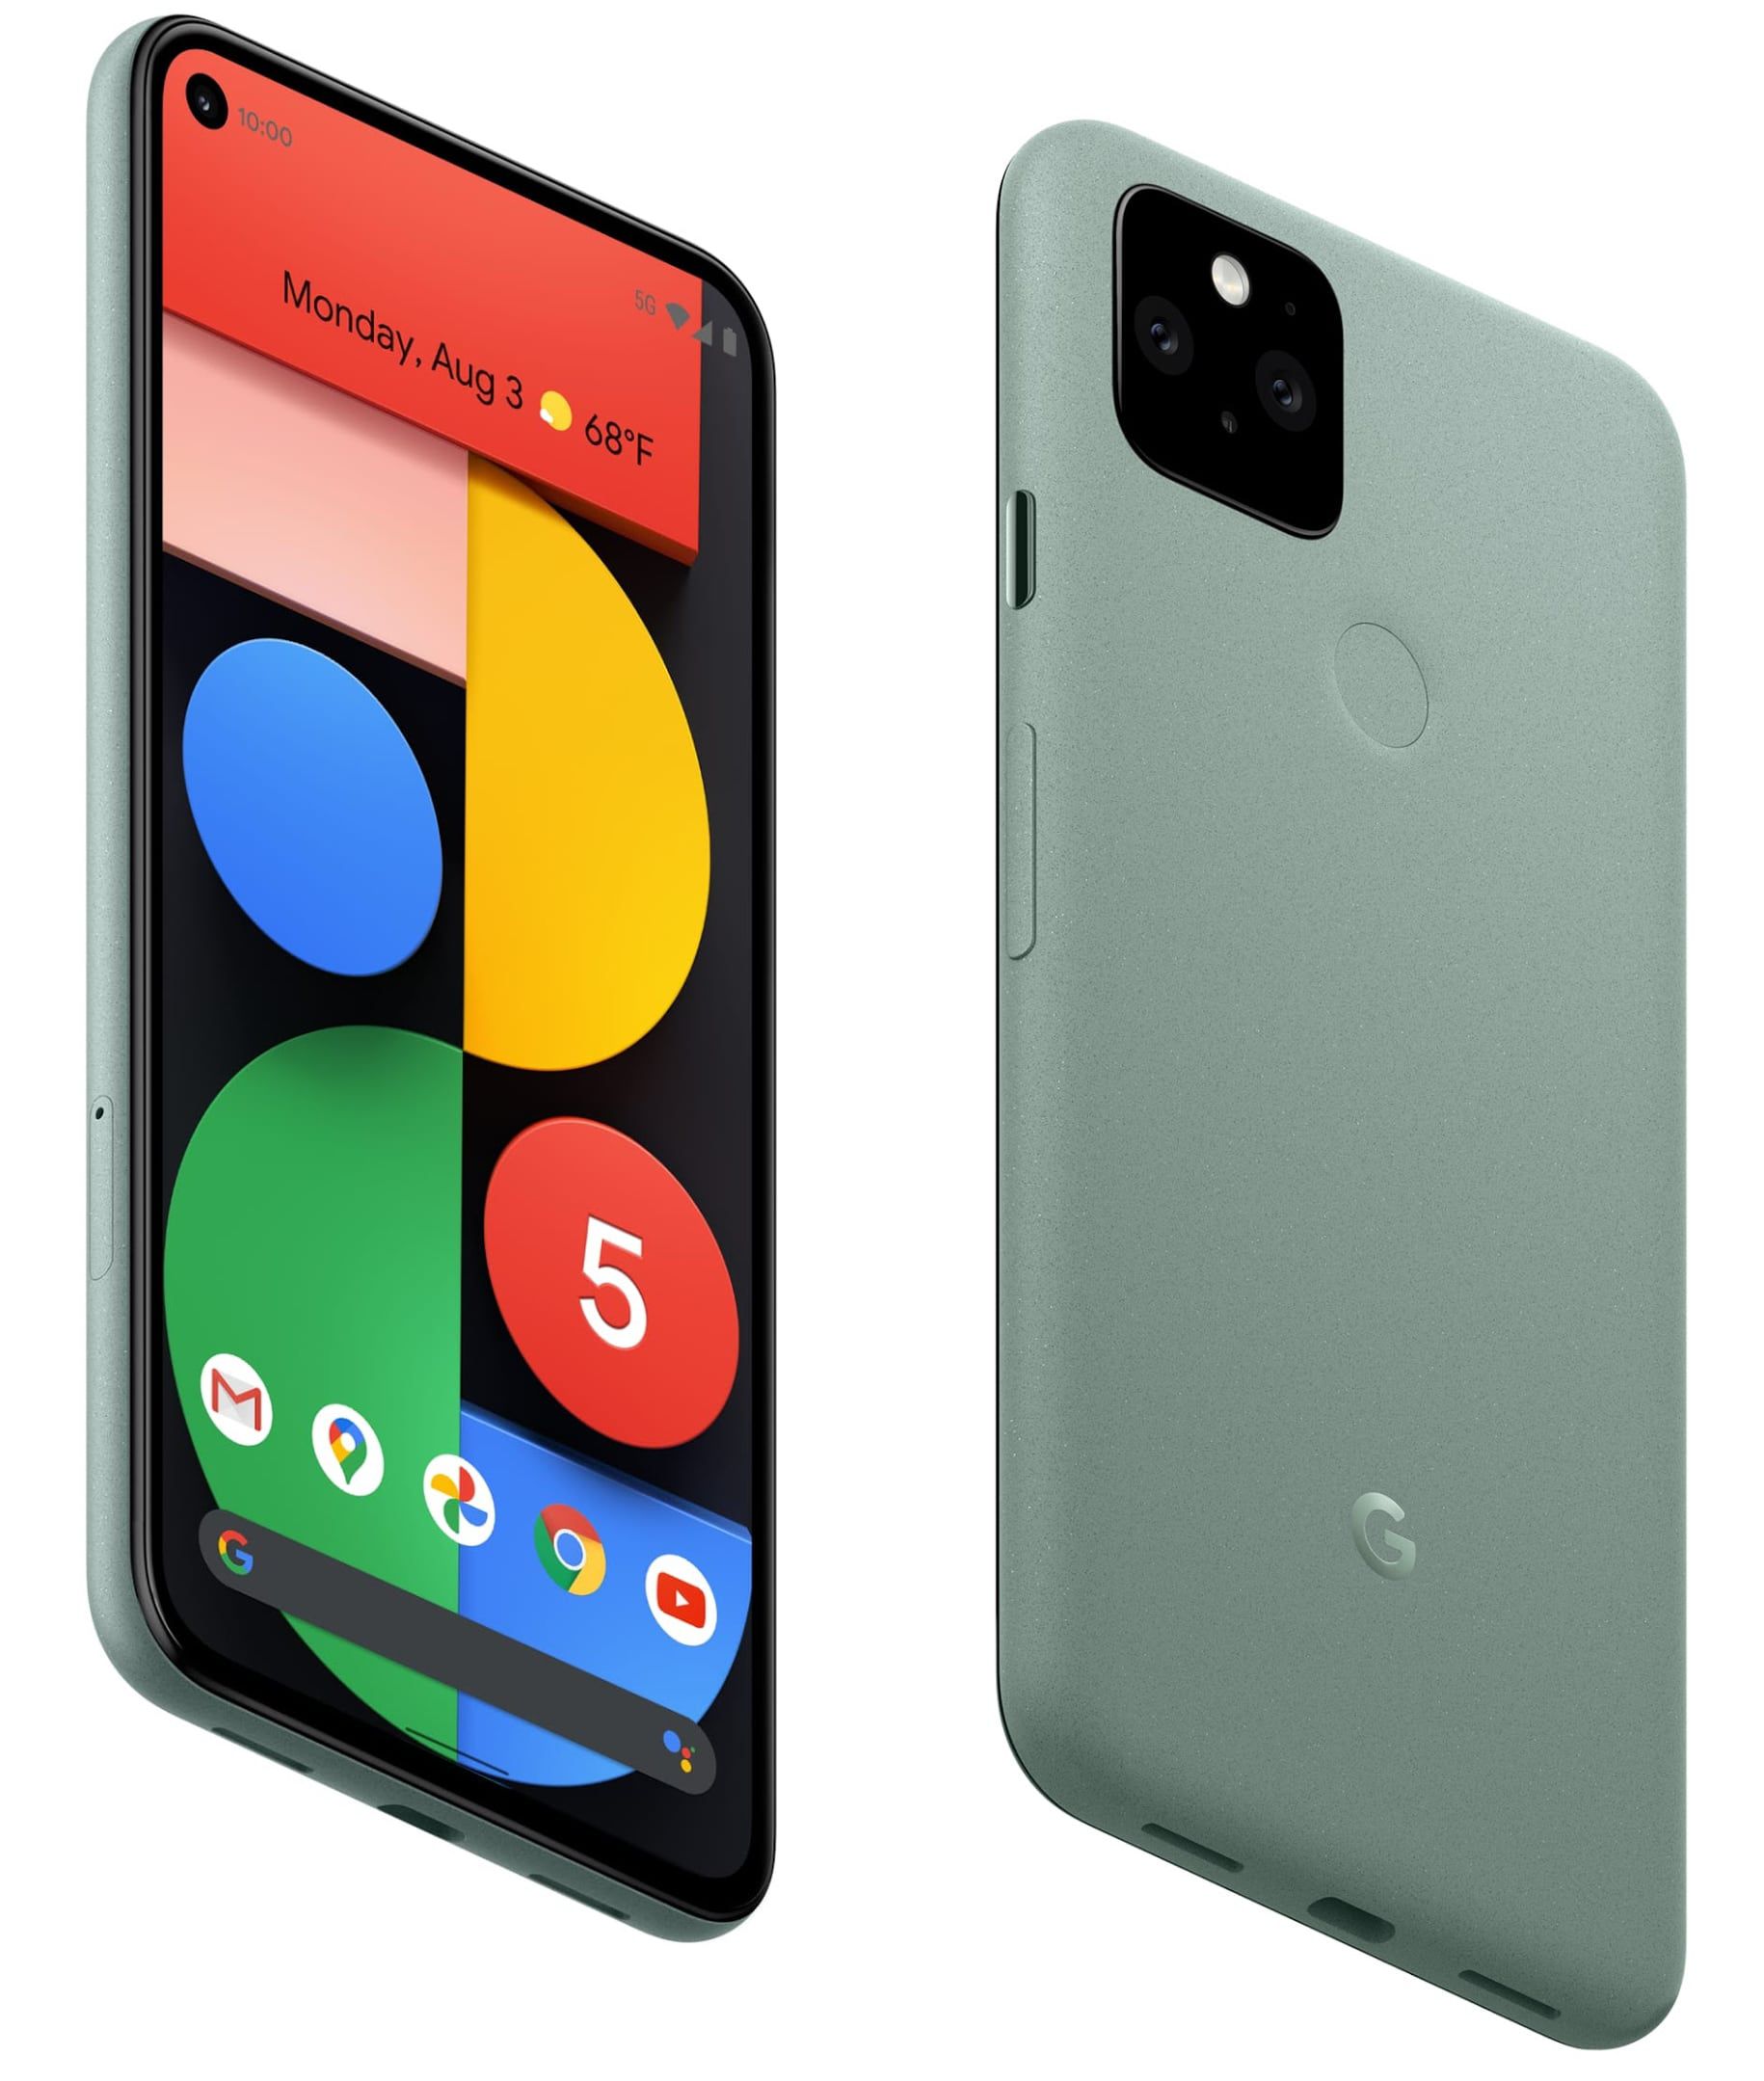 Google Unveils New Flagship Pixel 5 Smartphone With 5G and $699 